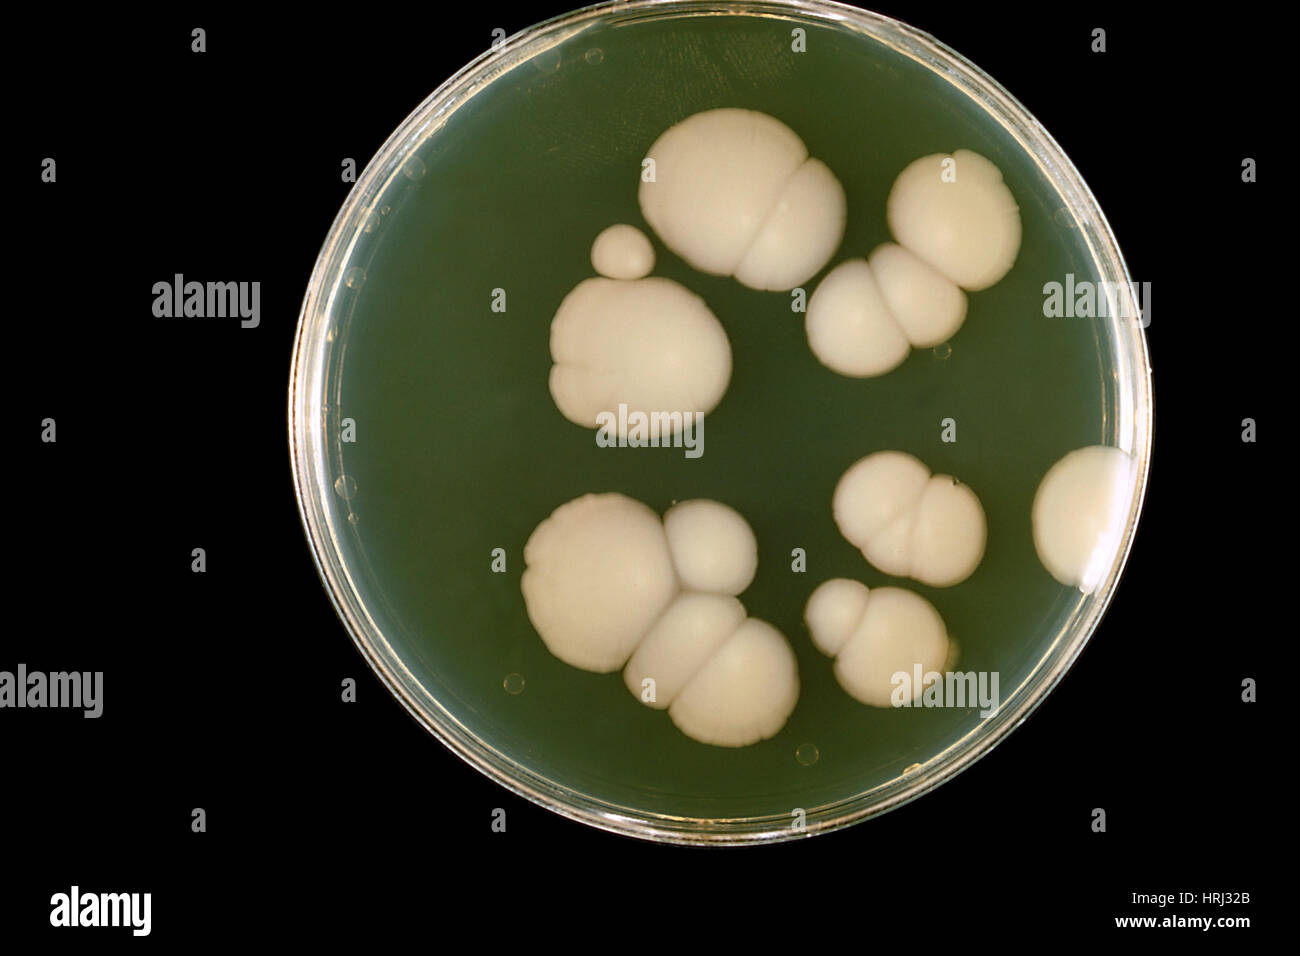 Candida albicans, Agar Plate Culture Stock Photo